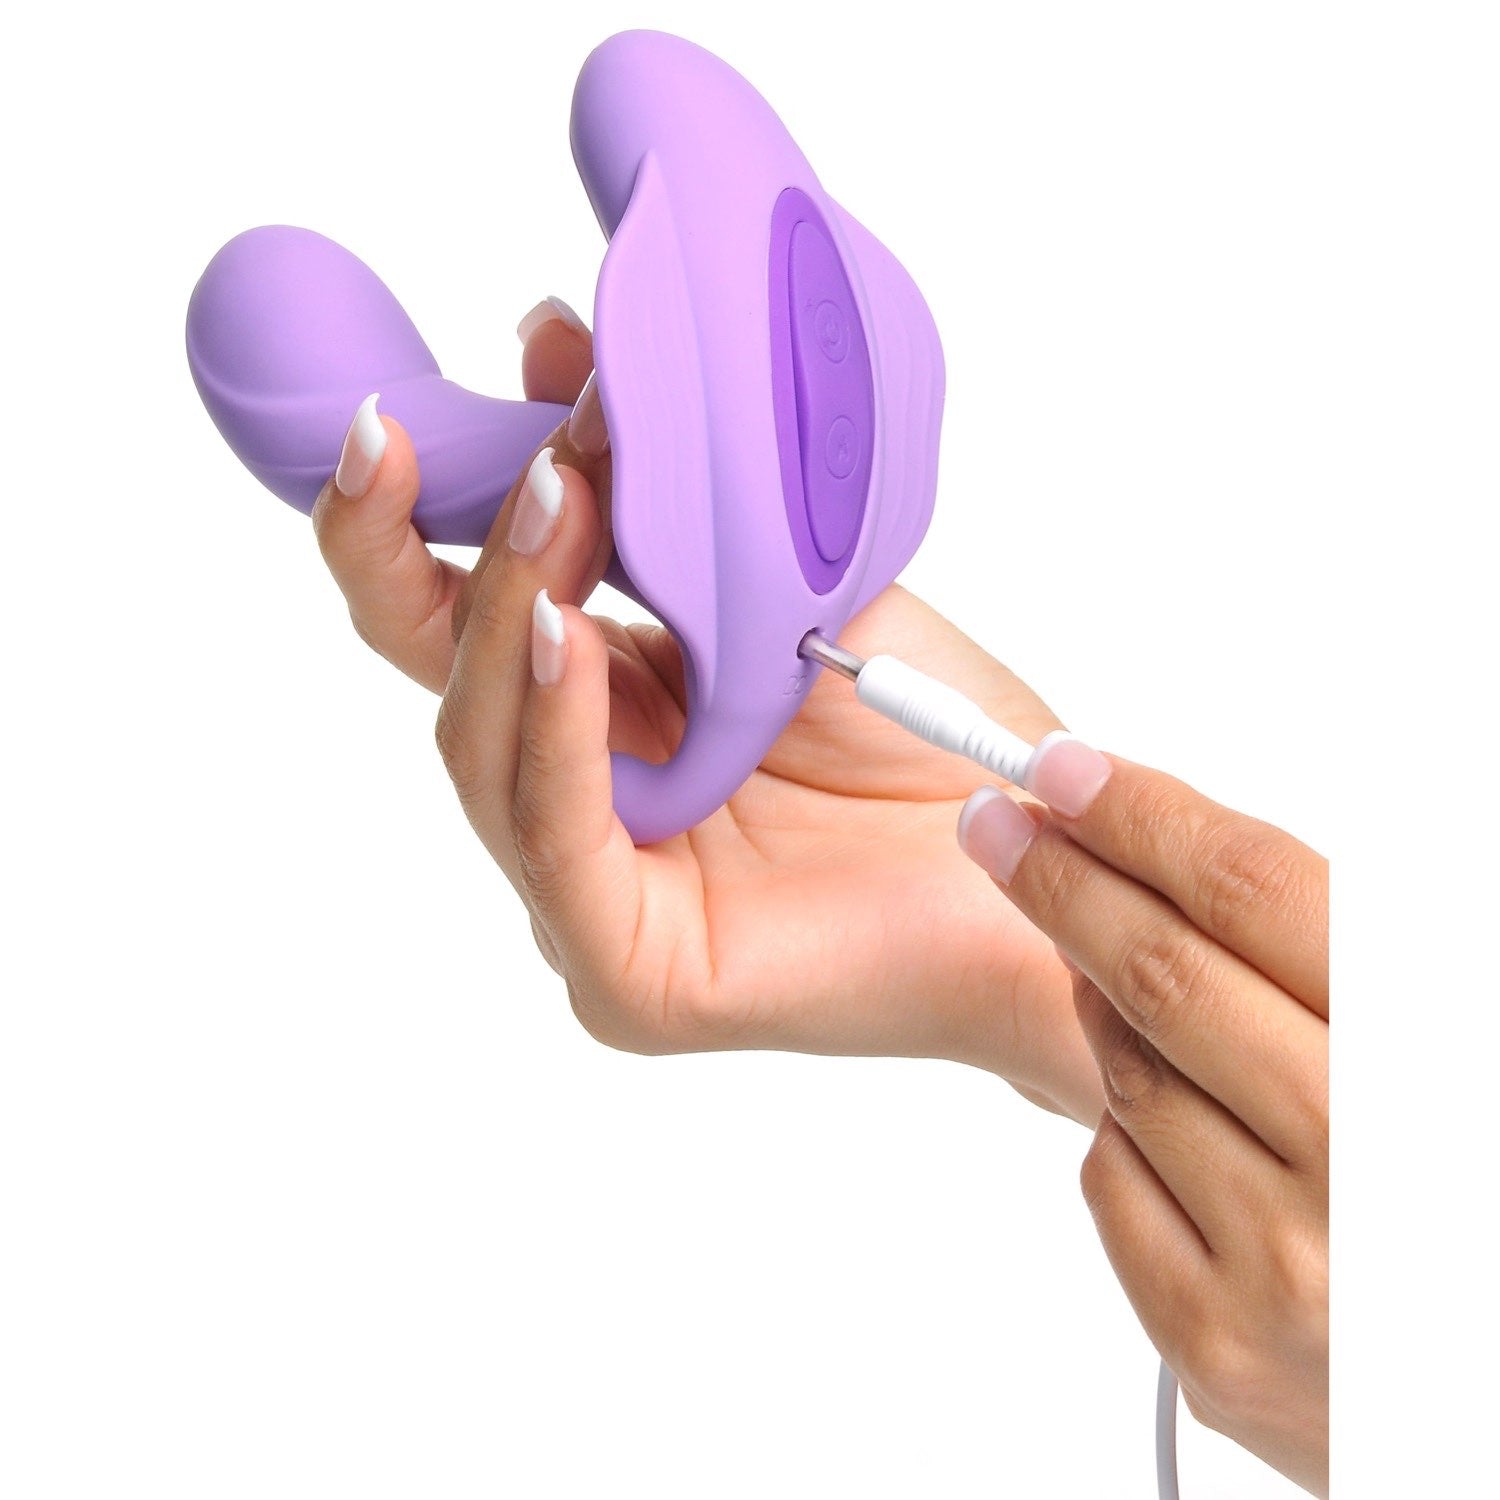 Fantasy For Her G-Spot Stimulate-Her - Purple USB Rechargeable Vibrator with Clit Stimulator and Wireless Remote by Pipedream